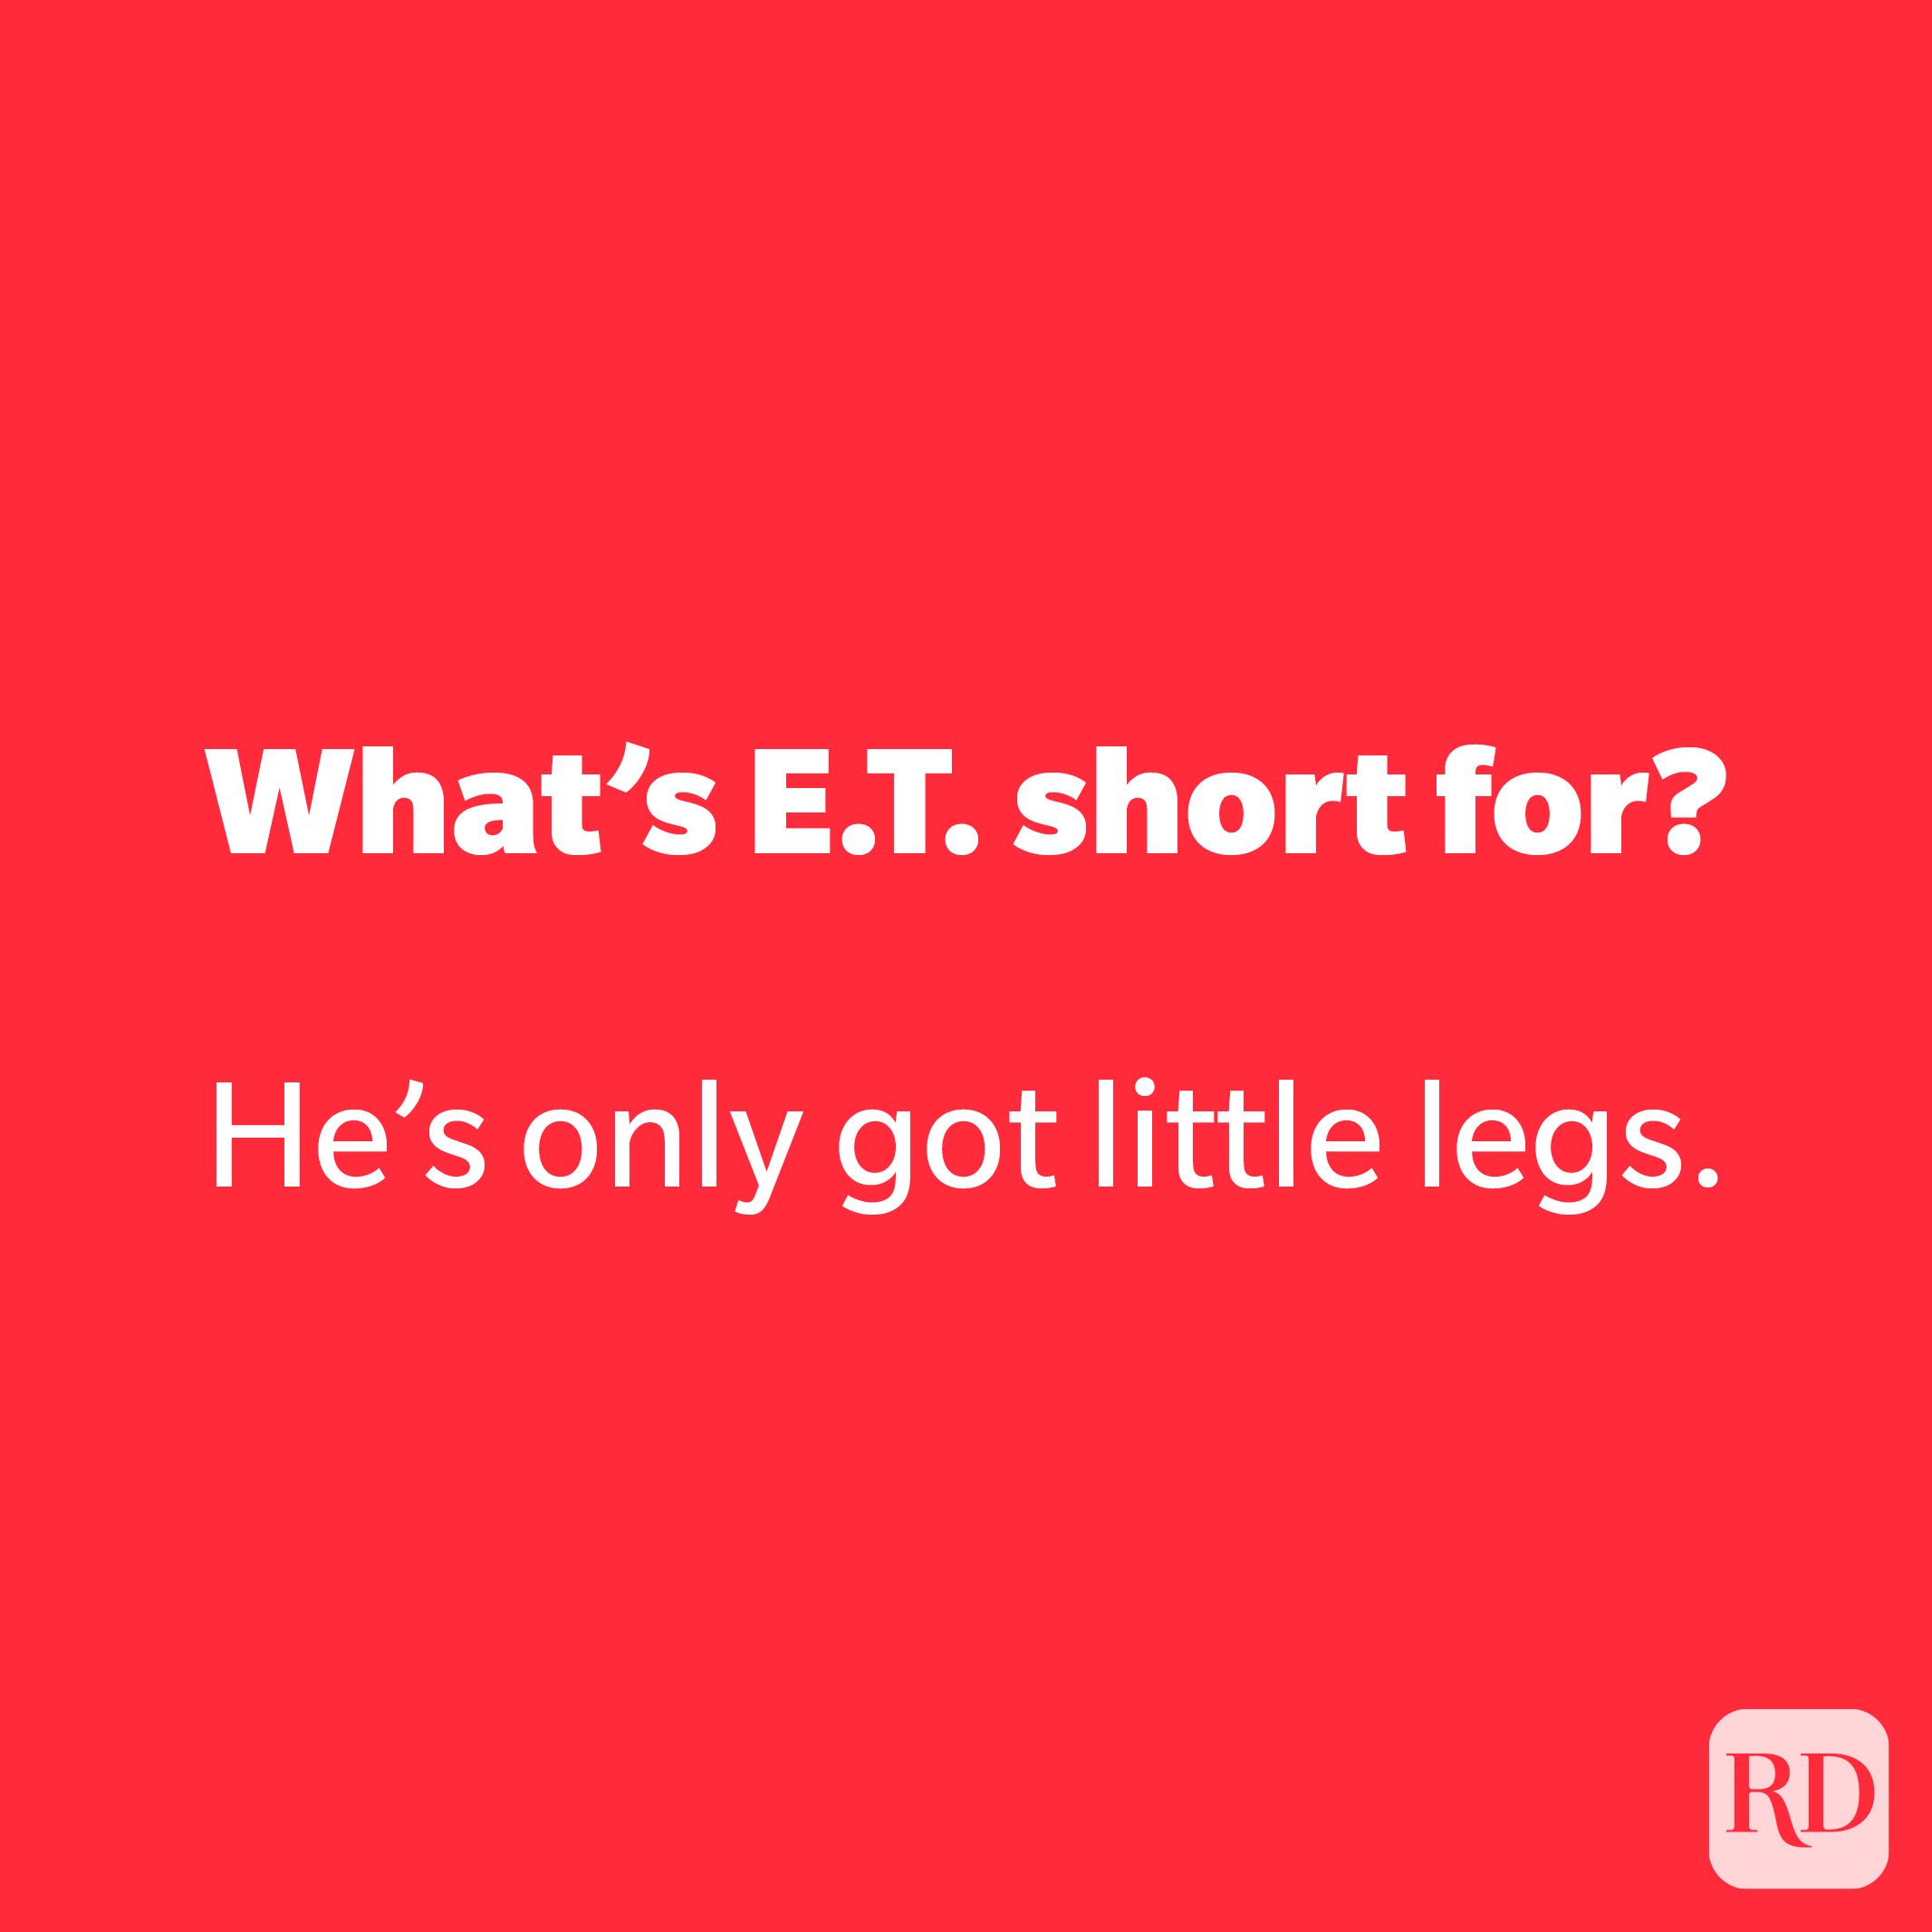 What's E.T. short for?